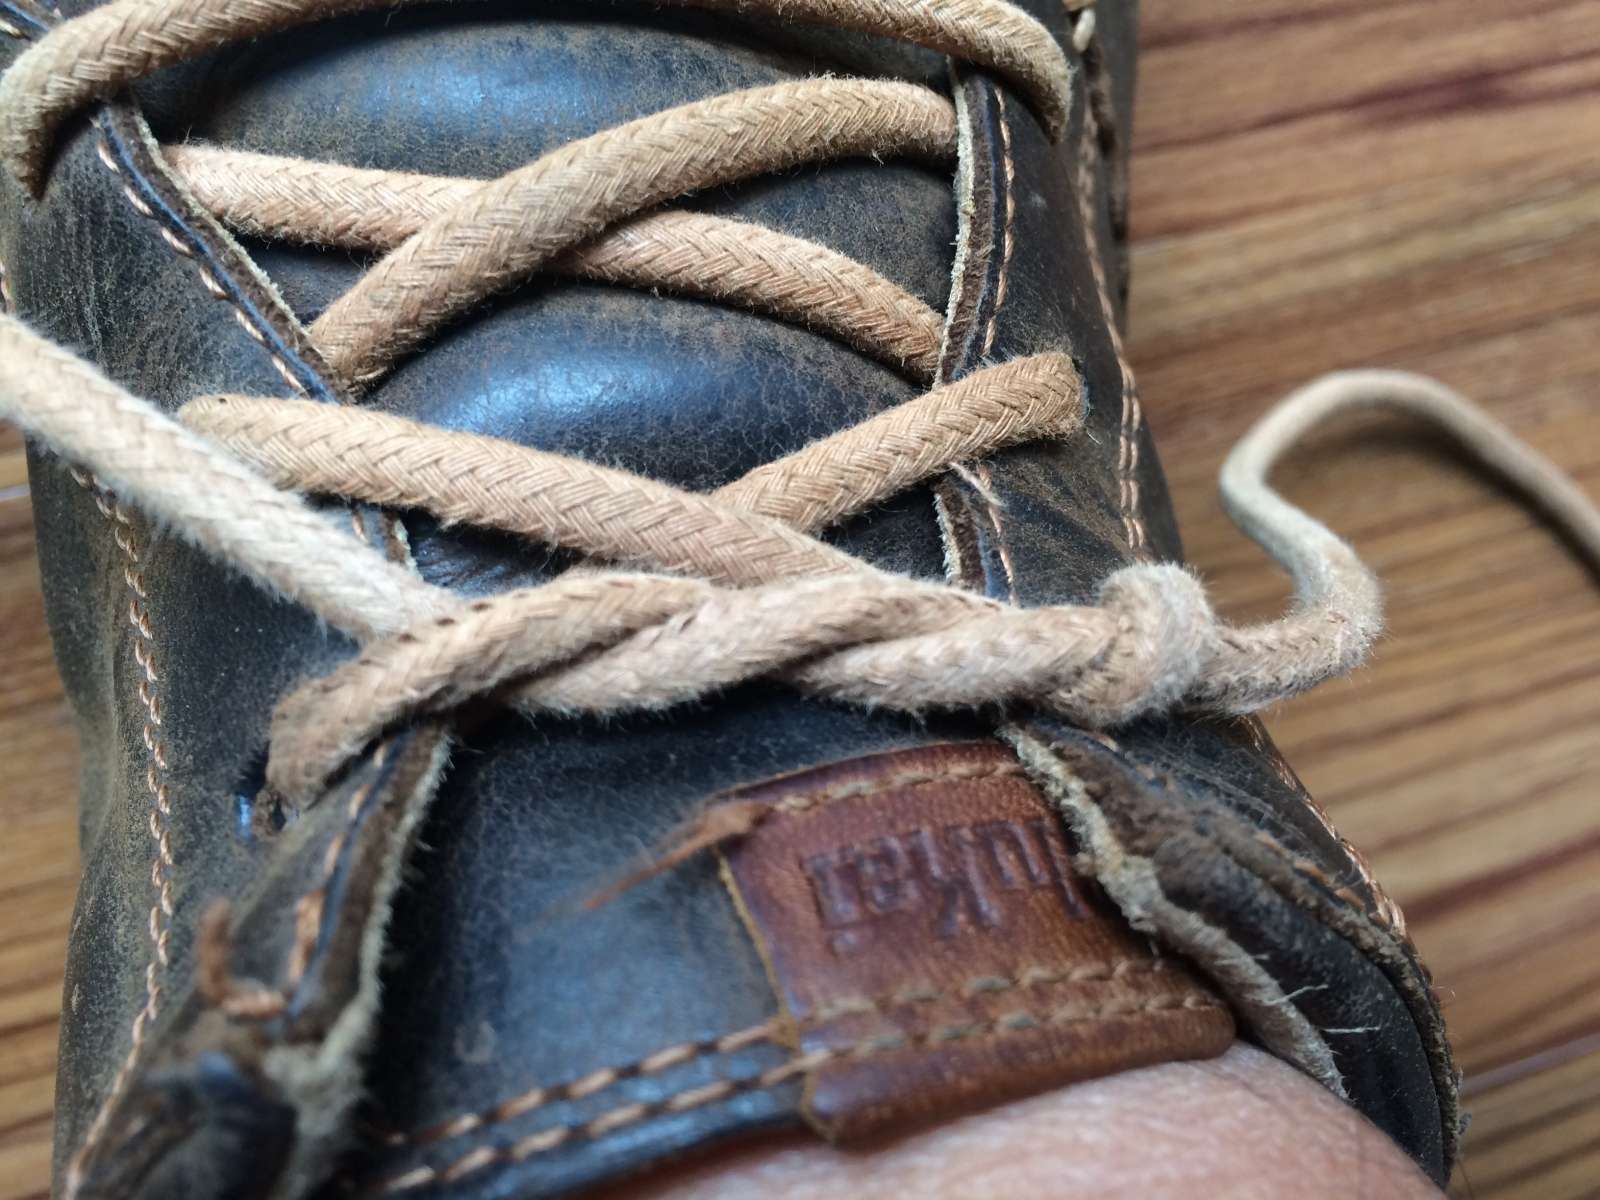 The Right Way to Tie Your Shoes | Page 2 | Survival Monkey Forums